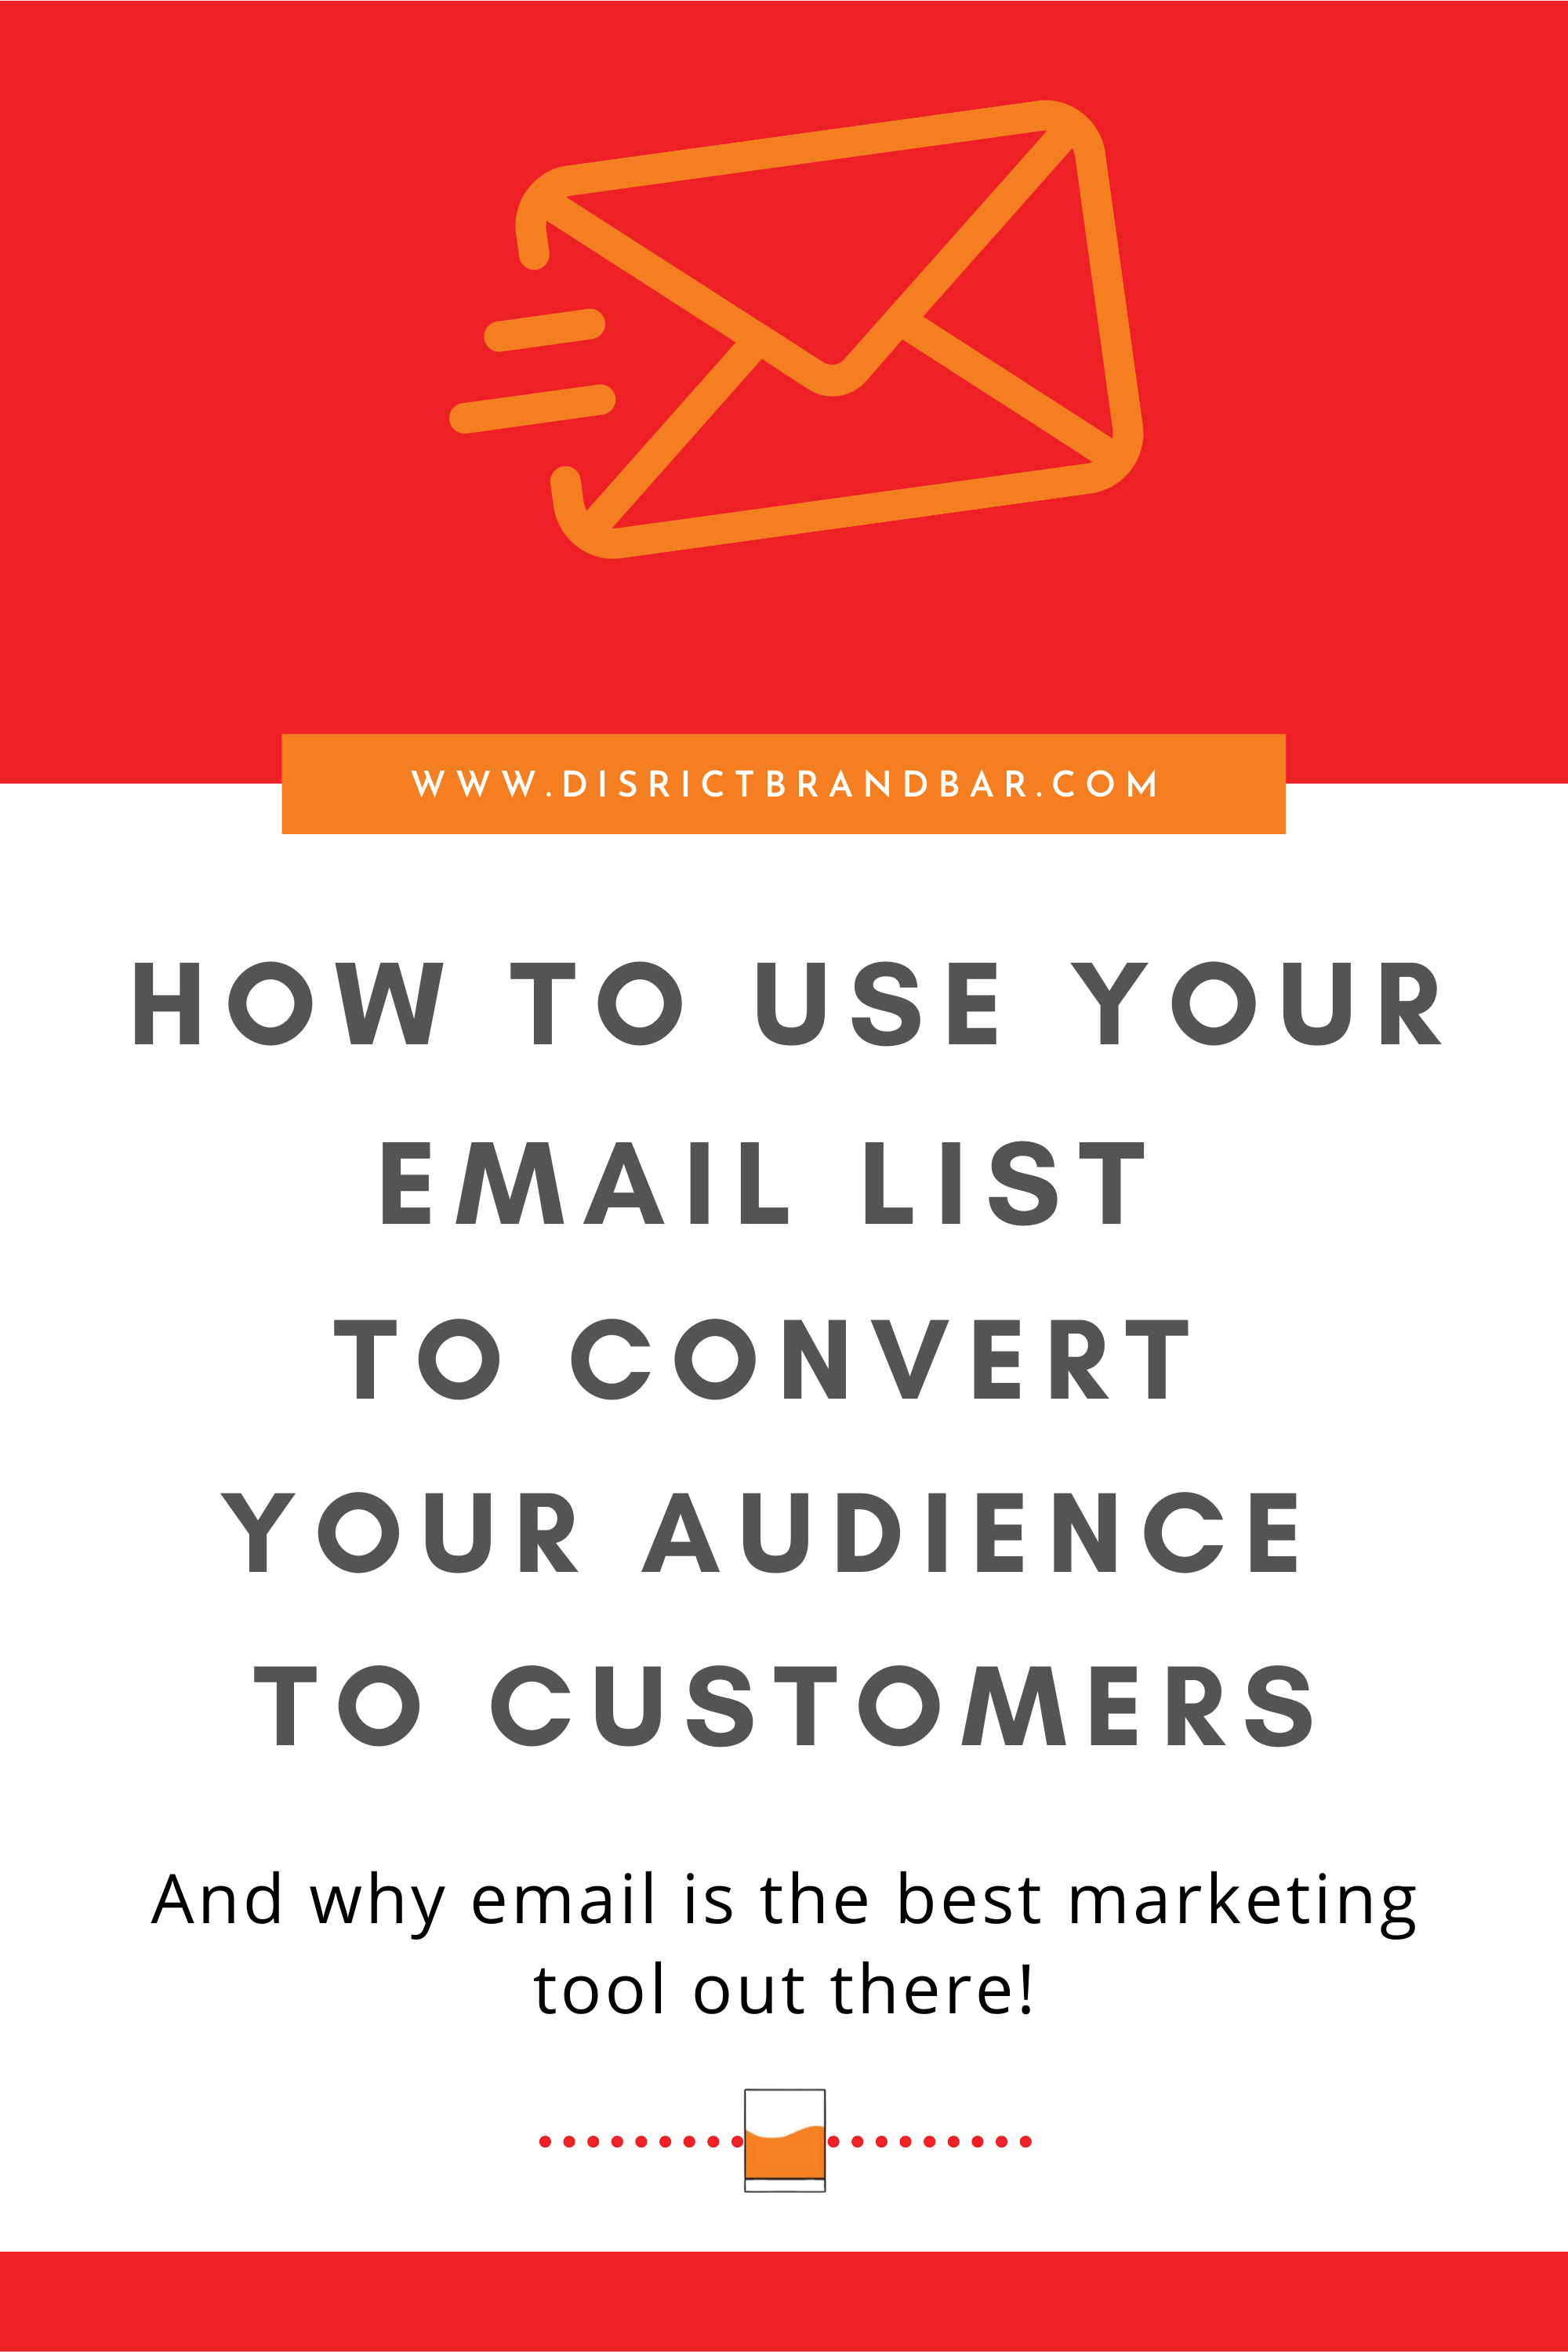 How to use your email list to convert your audience to customers